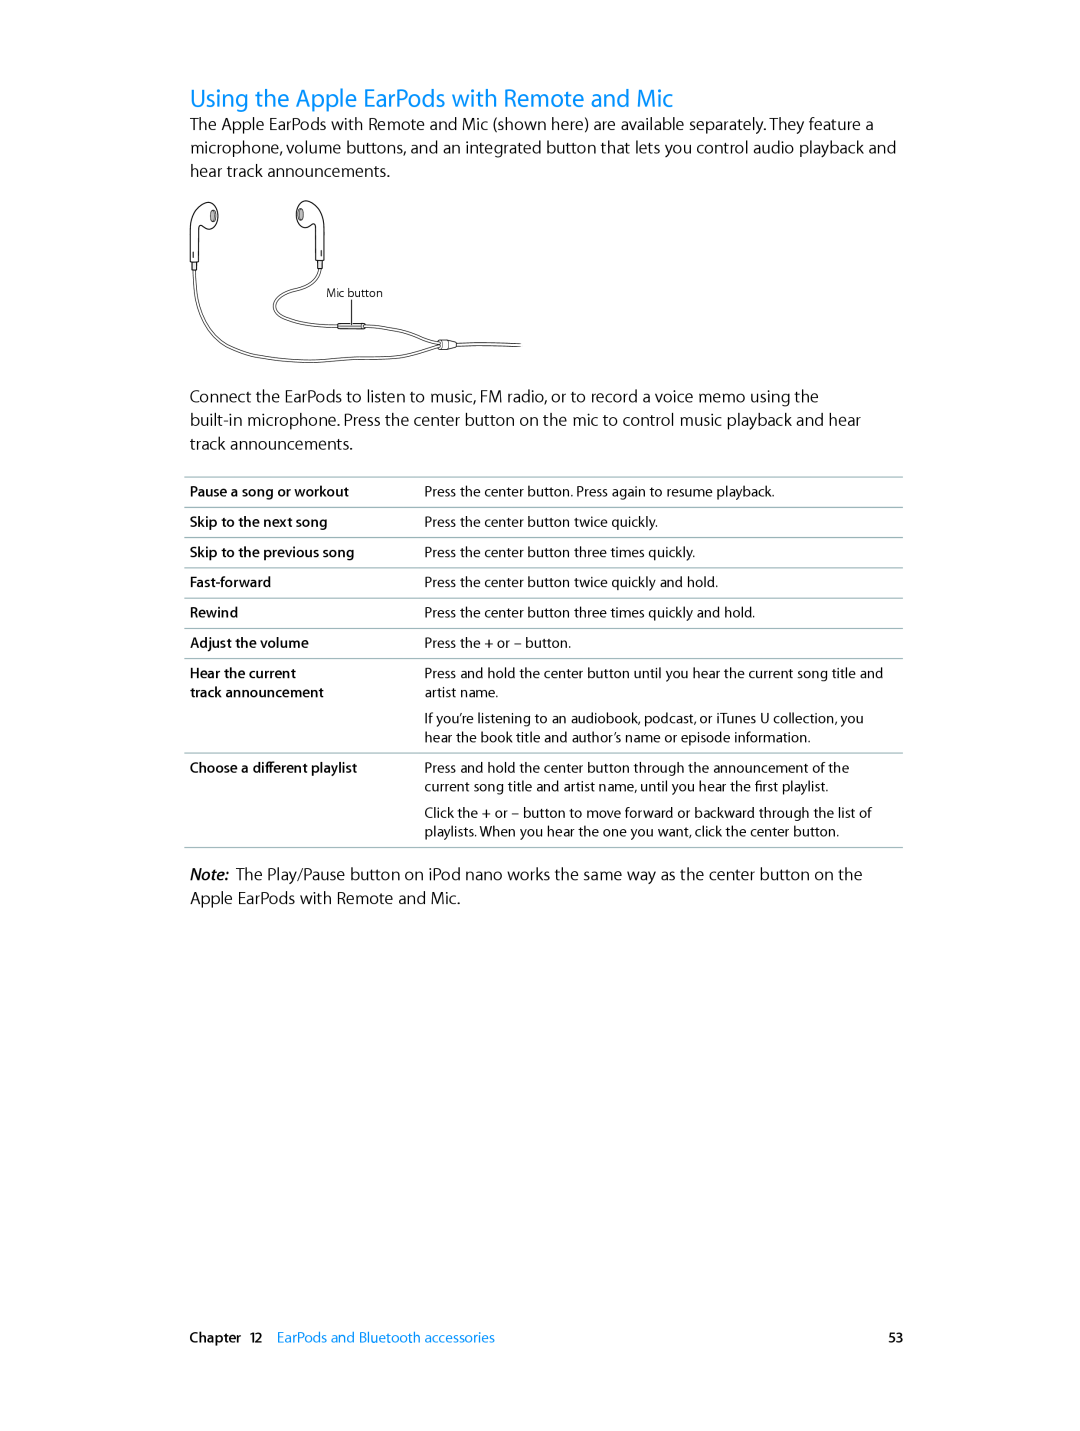 Apple MD477LL/A, MD481LL/A, MD478LL/A manual Using the Apple EarPods with Remote and Mic, EarPods and Bluetooth accessories 